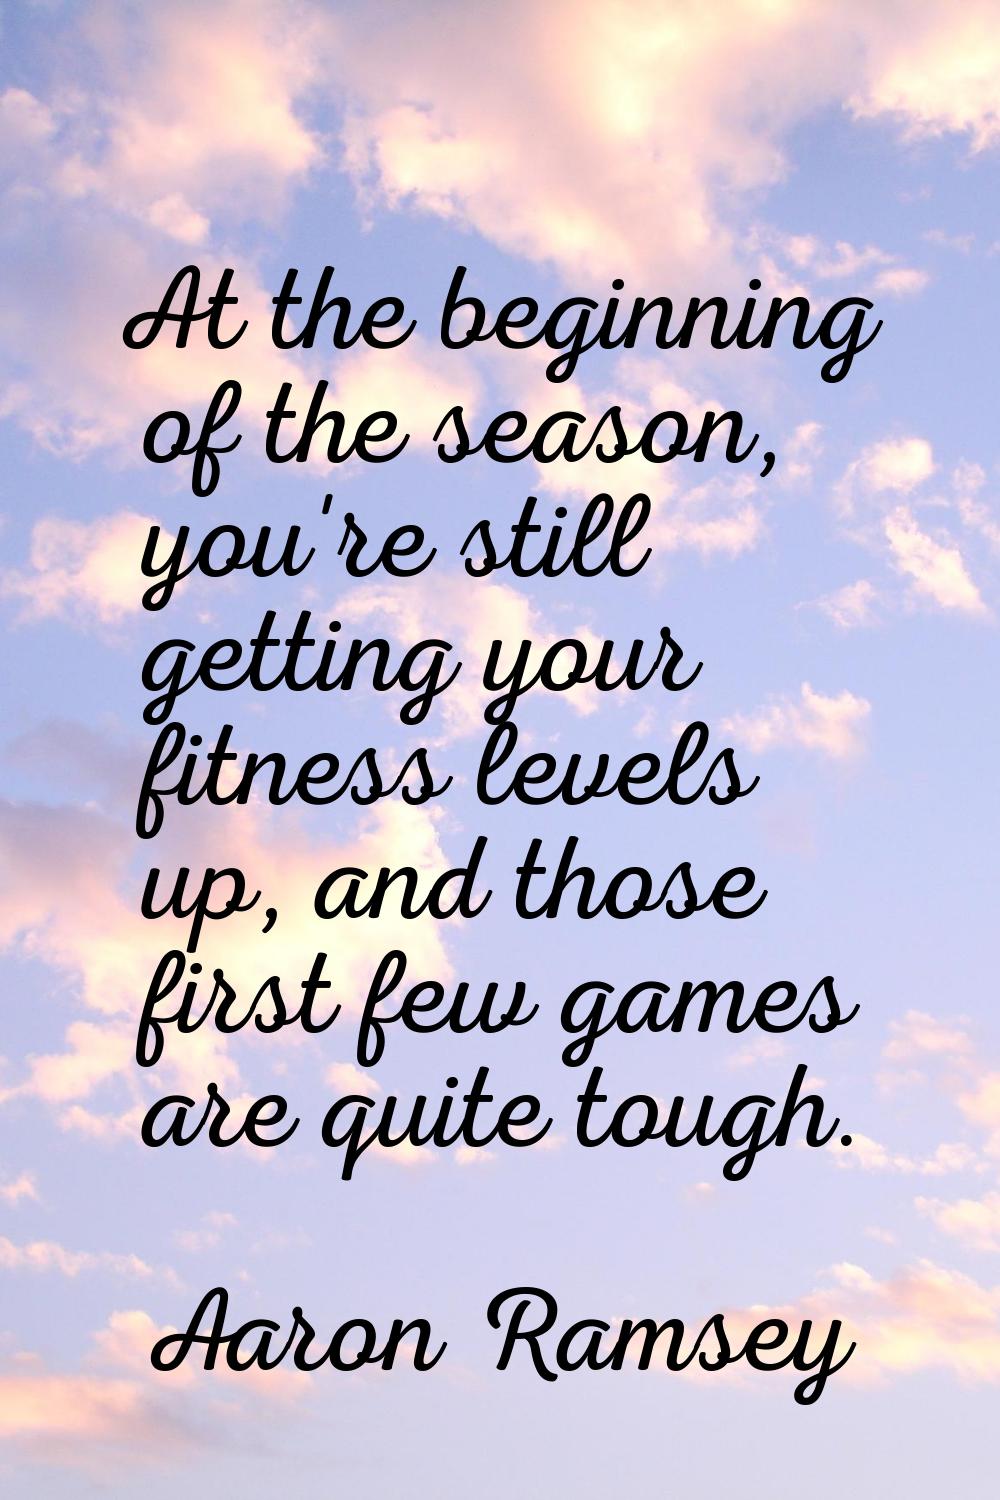 At the beginning of the season, you're still getting your fitness levels up, and those first few ga